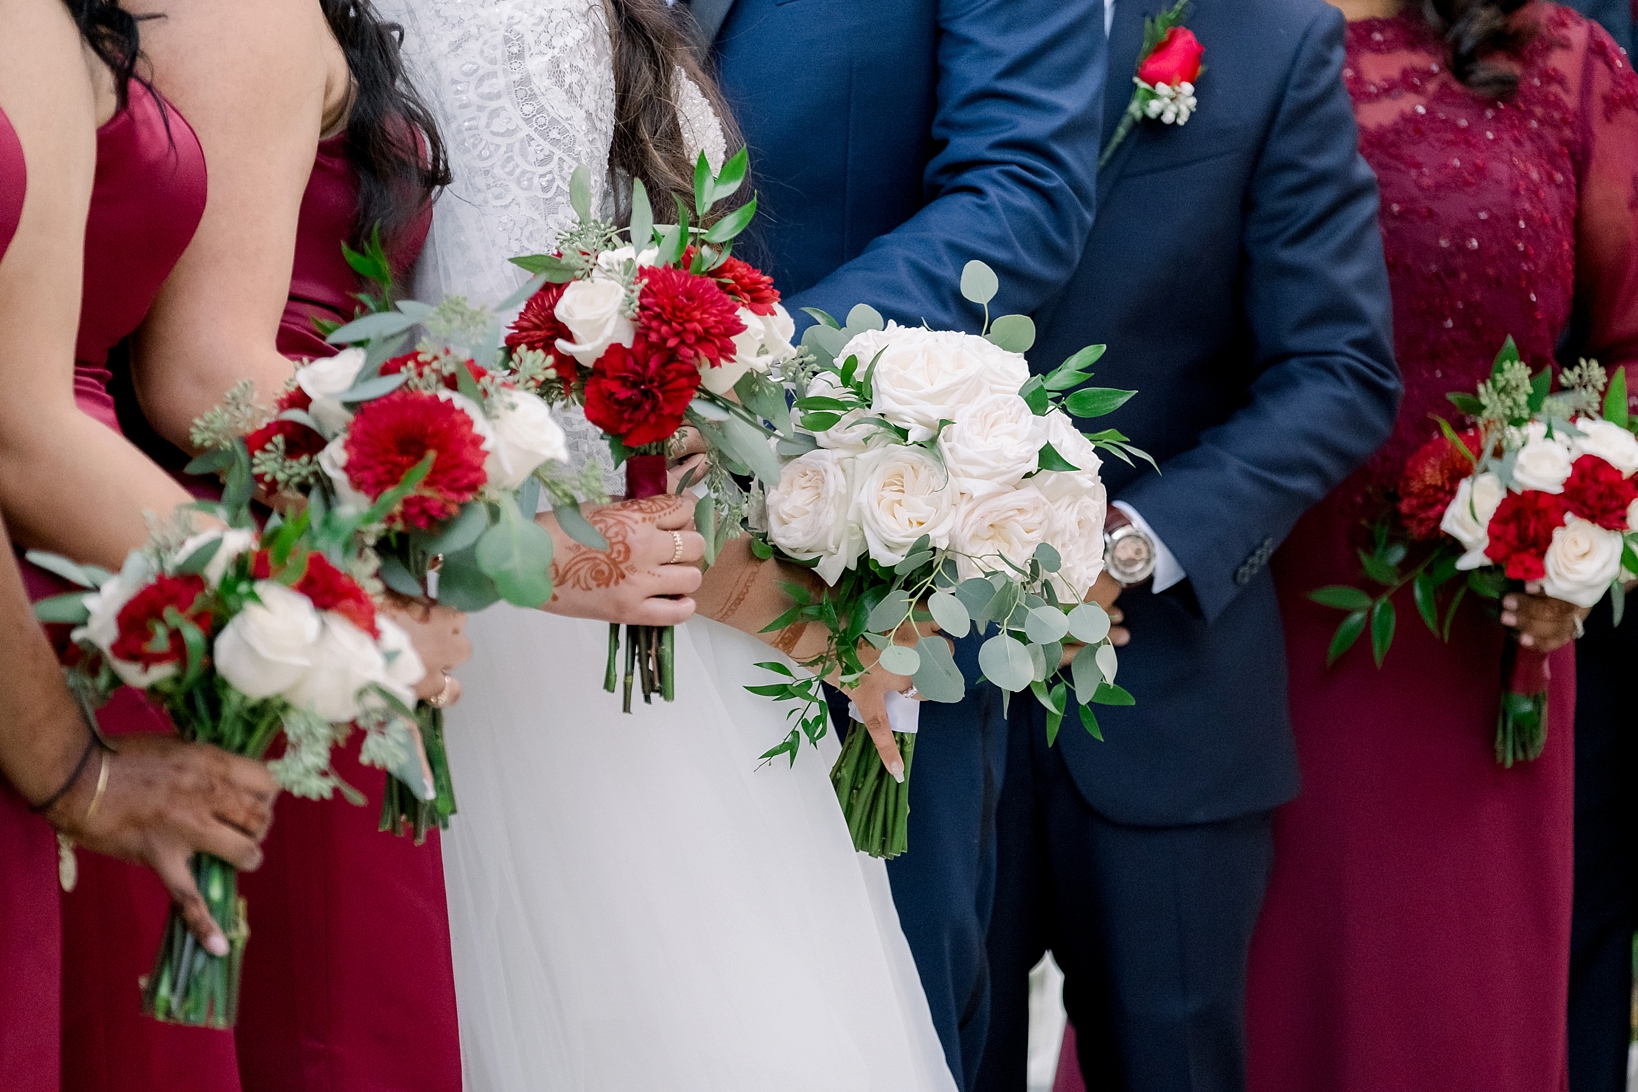 The floral arrangements of the bridal party